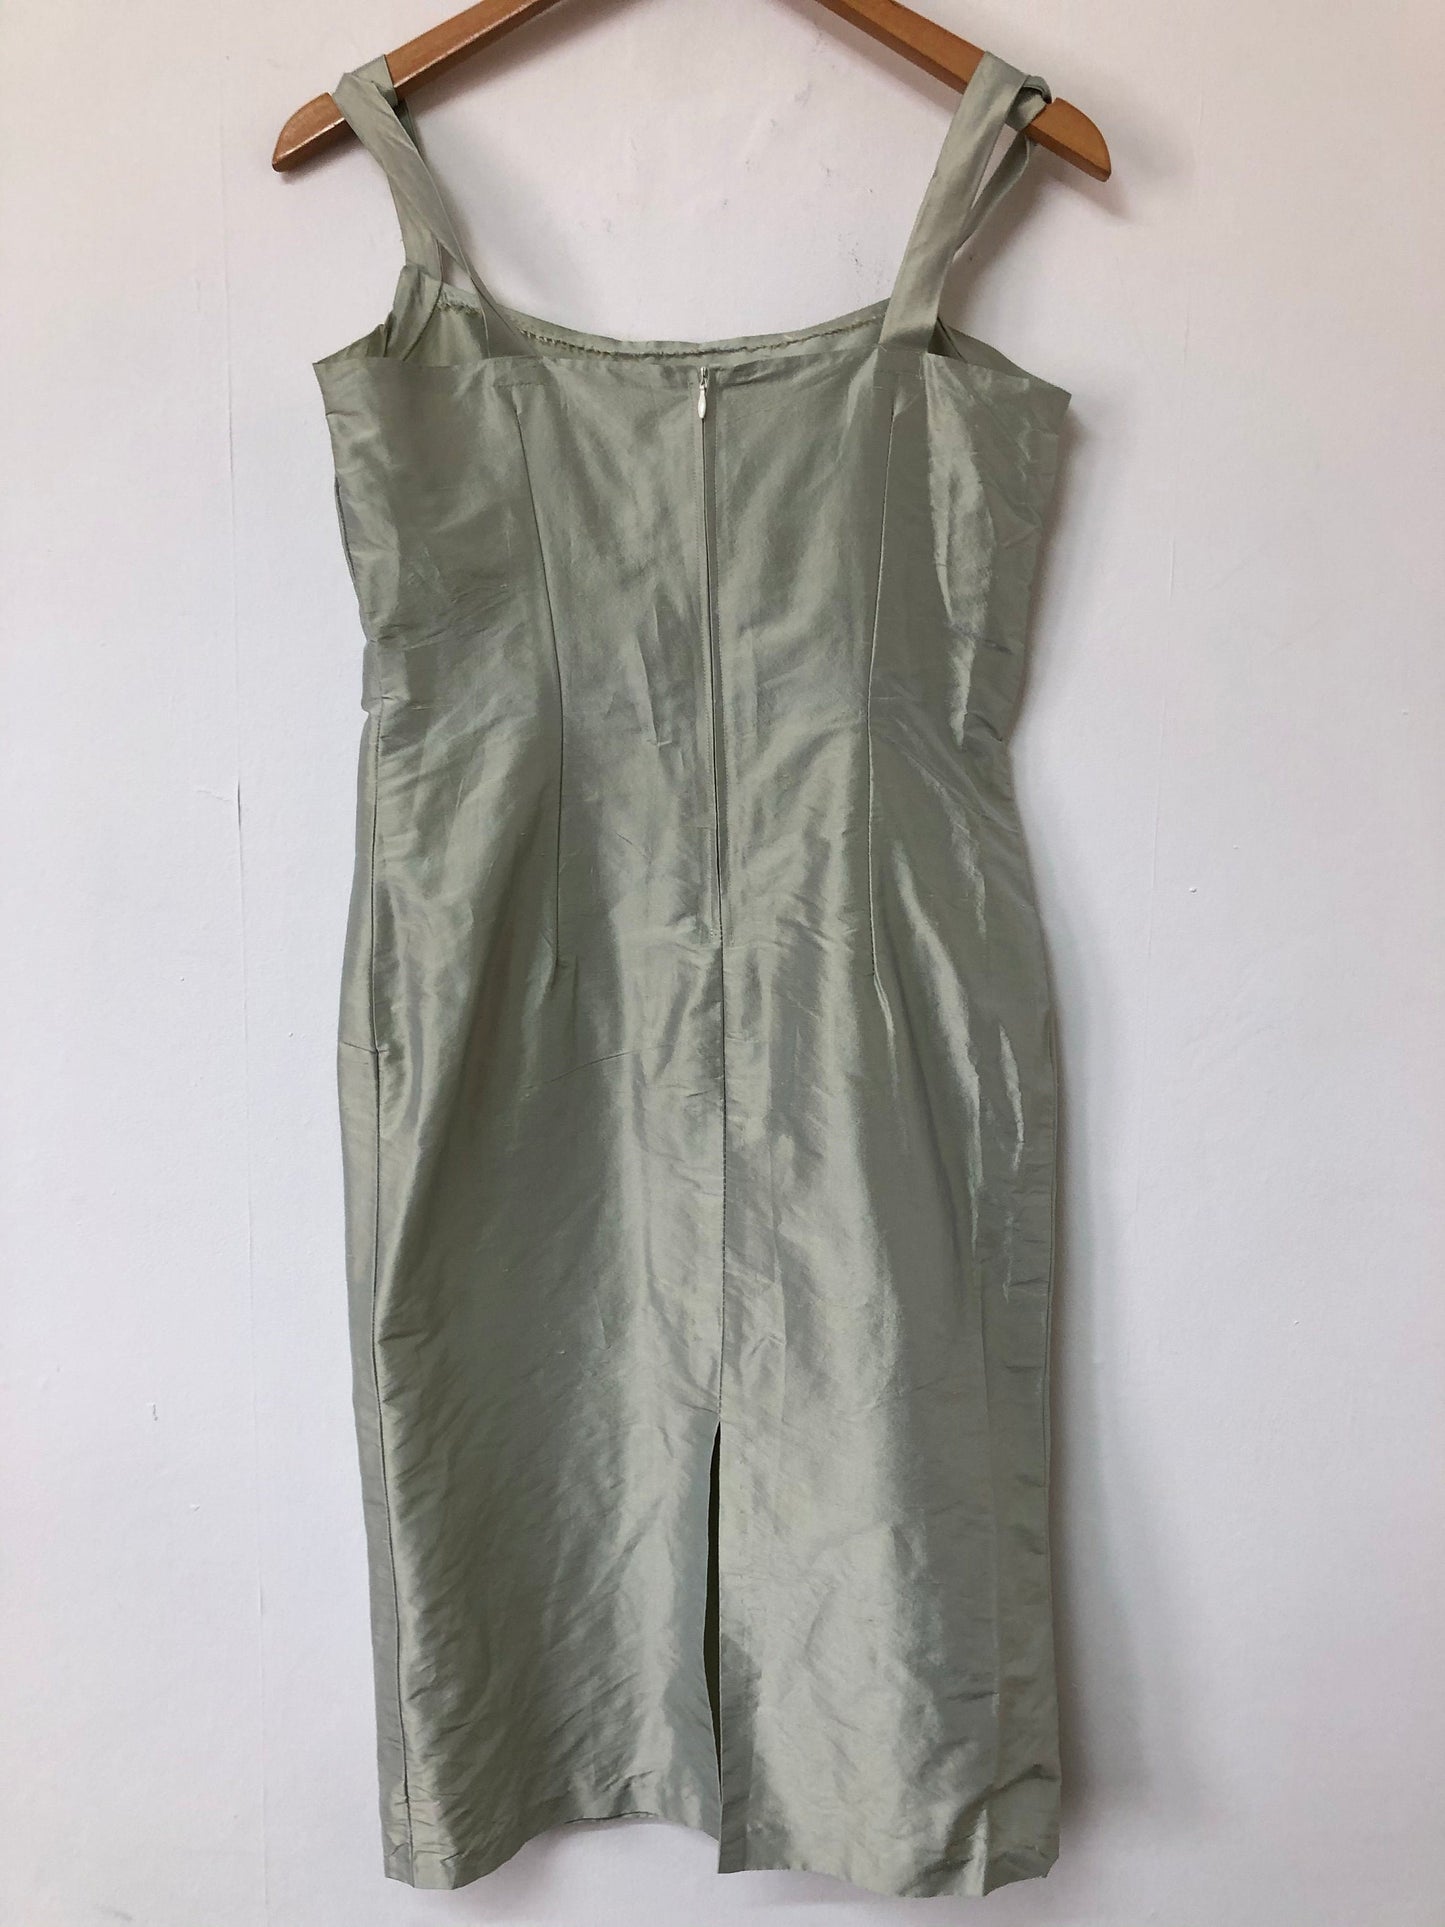 Ladies Vintage Hand Finished Pale Green Fitted Sheath Dress Size 8/10